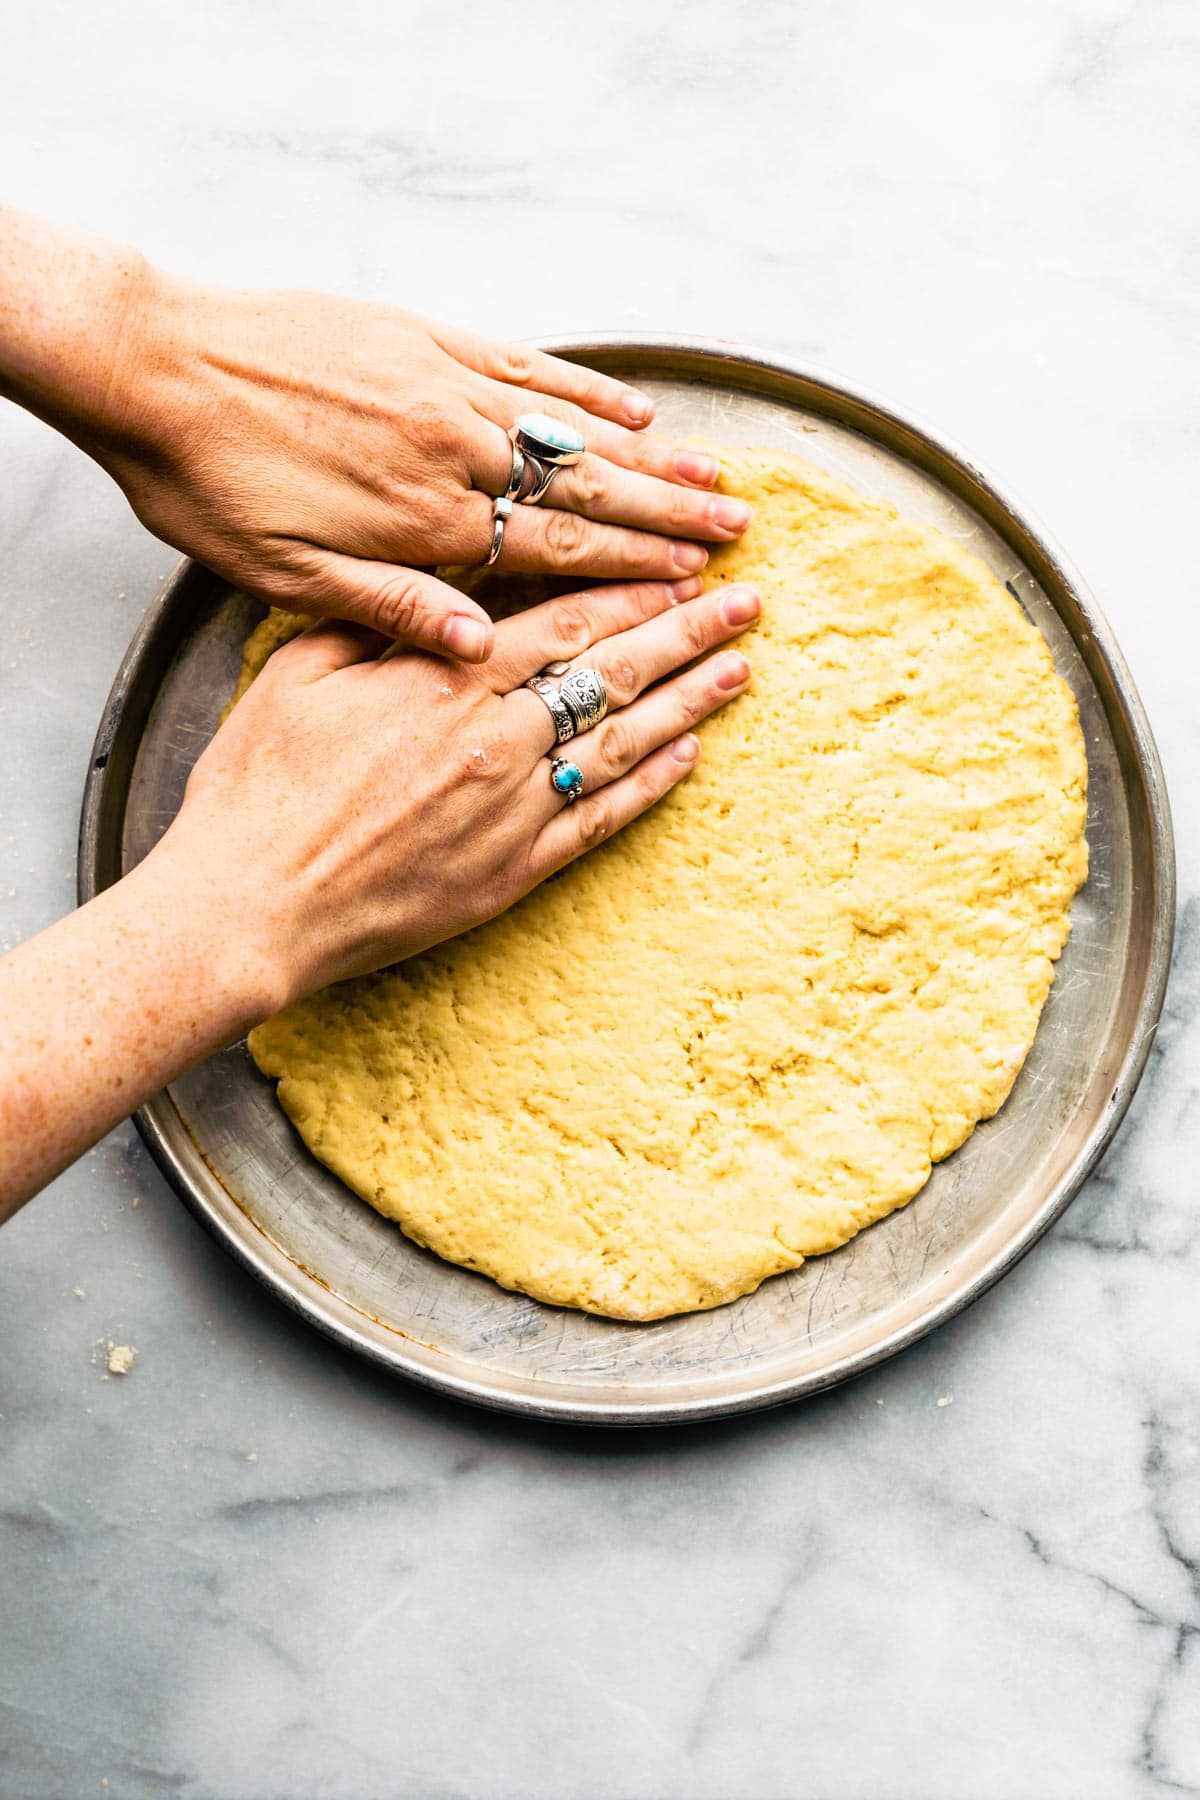 woman's hands pressing yeast free pizza dough into a pizza pan